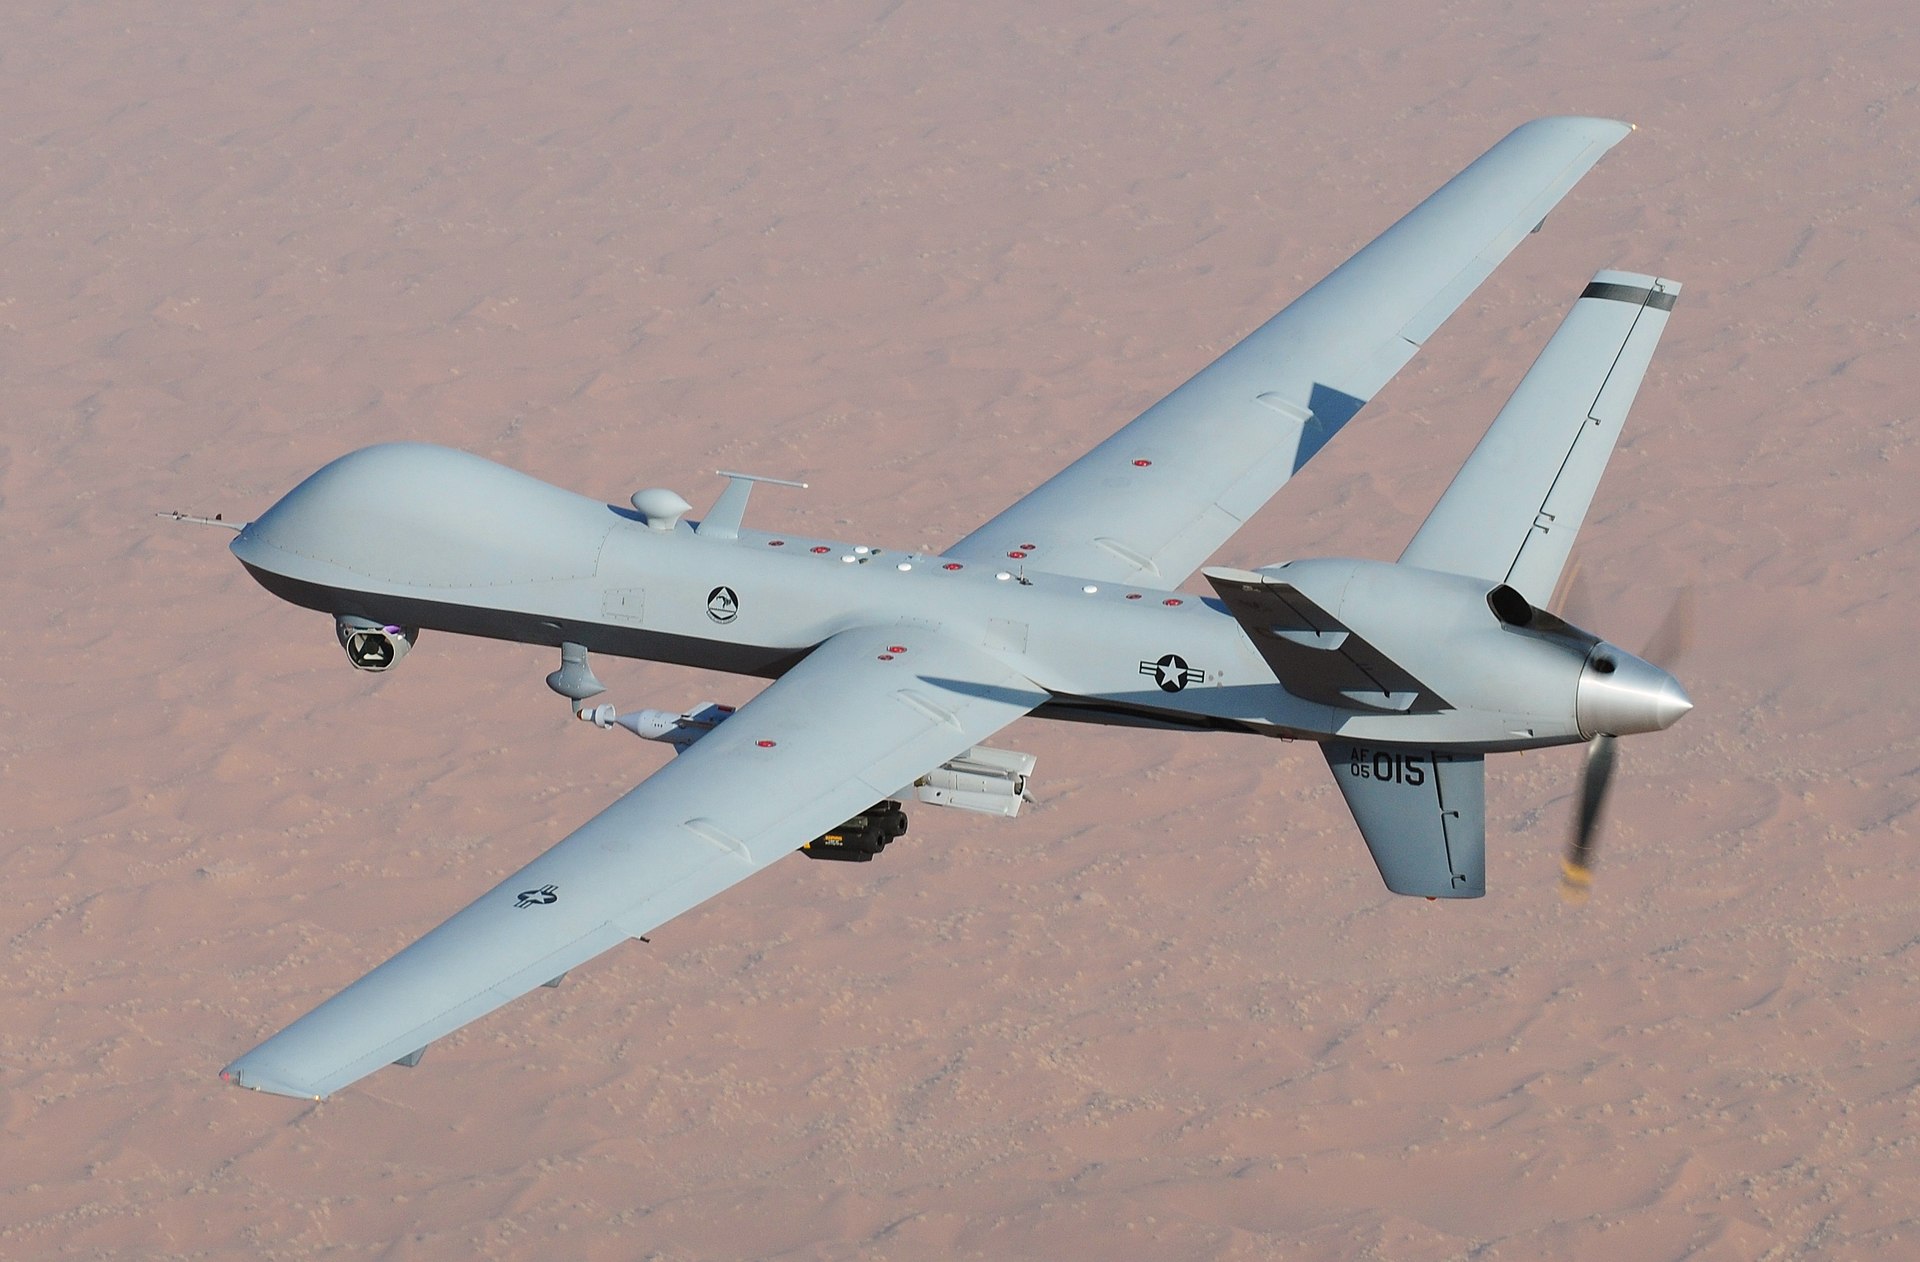 India's Strategic Partnership: Phased Acquisition Of MQ-9B Drones From The US